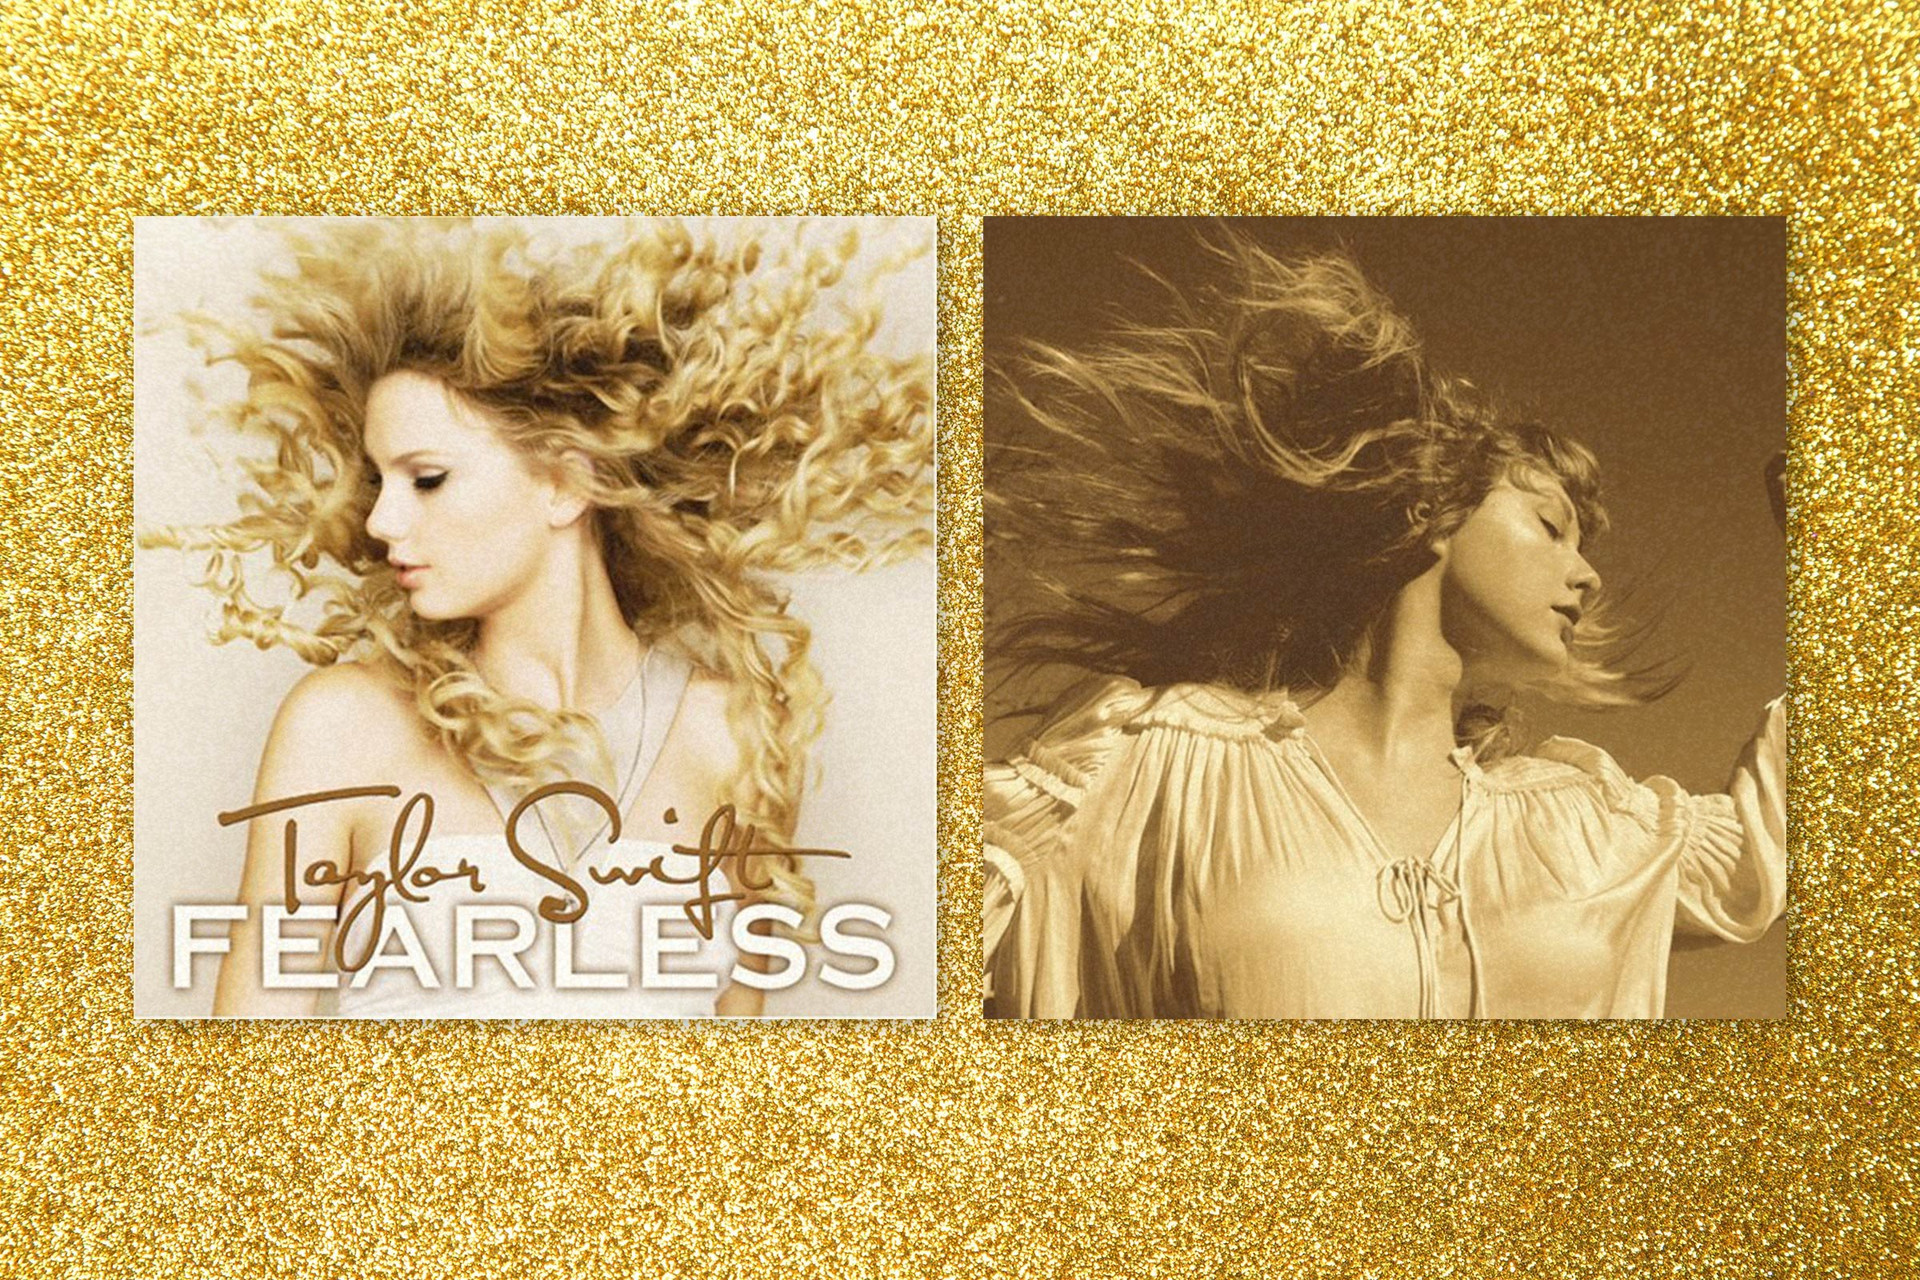 taylor-swift-fearless-roundtable.jpg